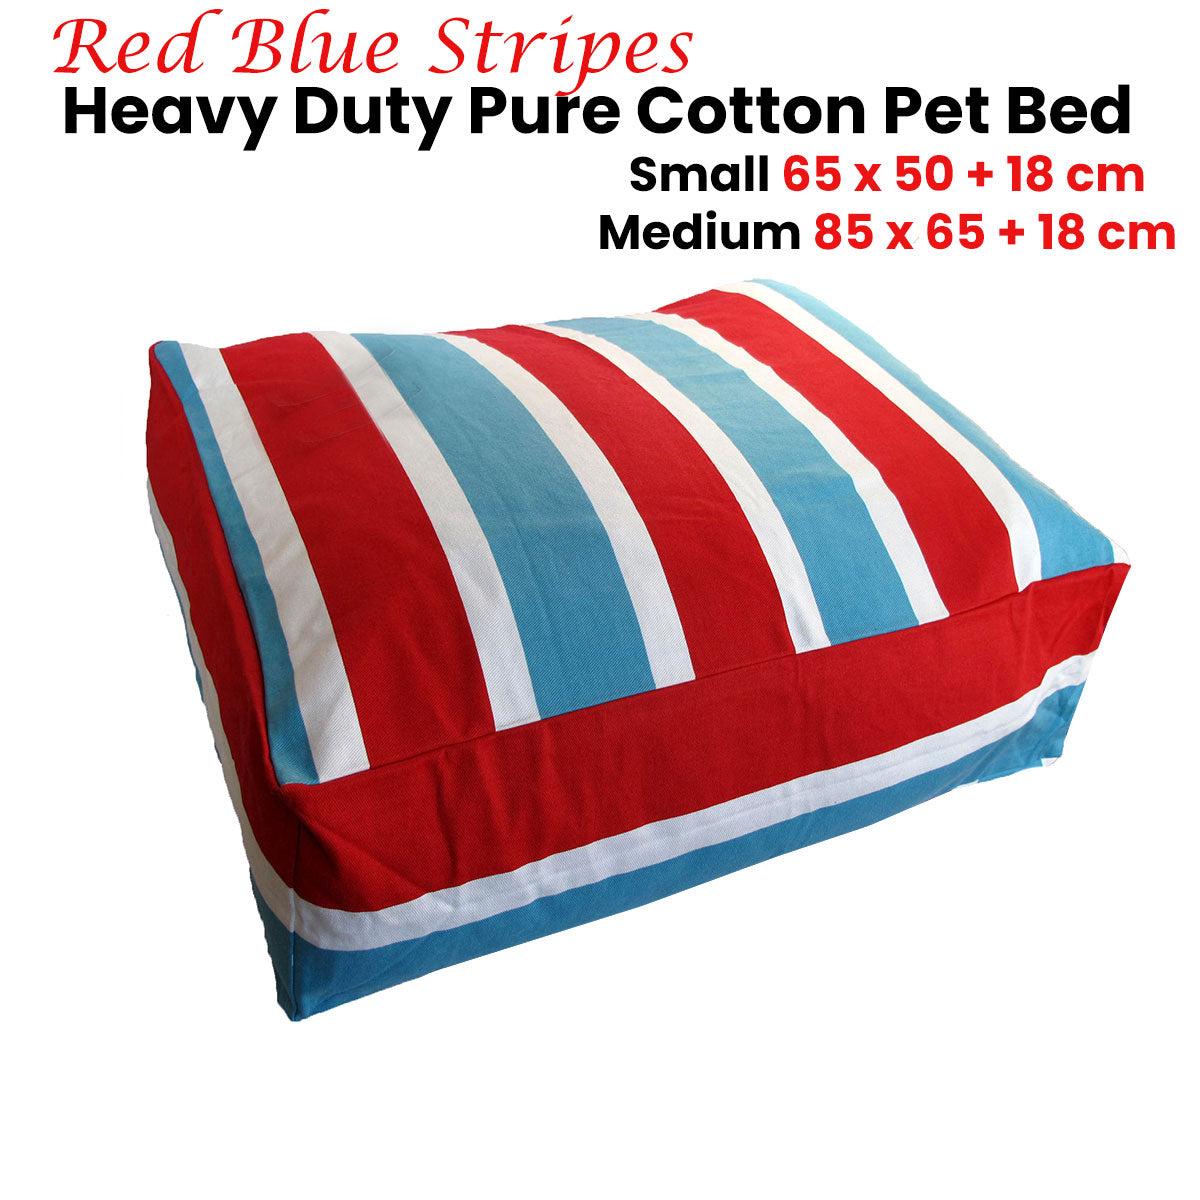 Heavy Duty Pure Cotton Pet Dog Bed Cover Medium Blue Red Stripes